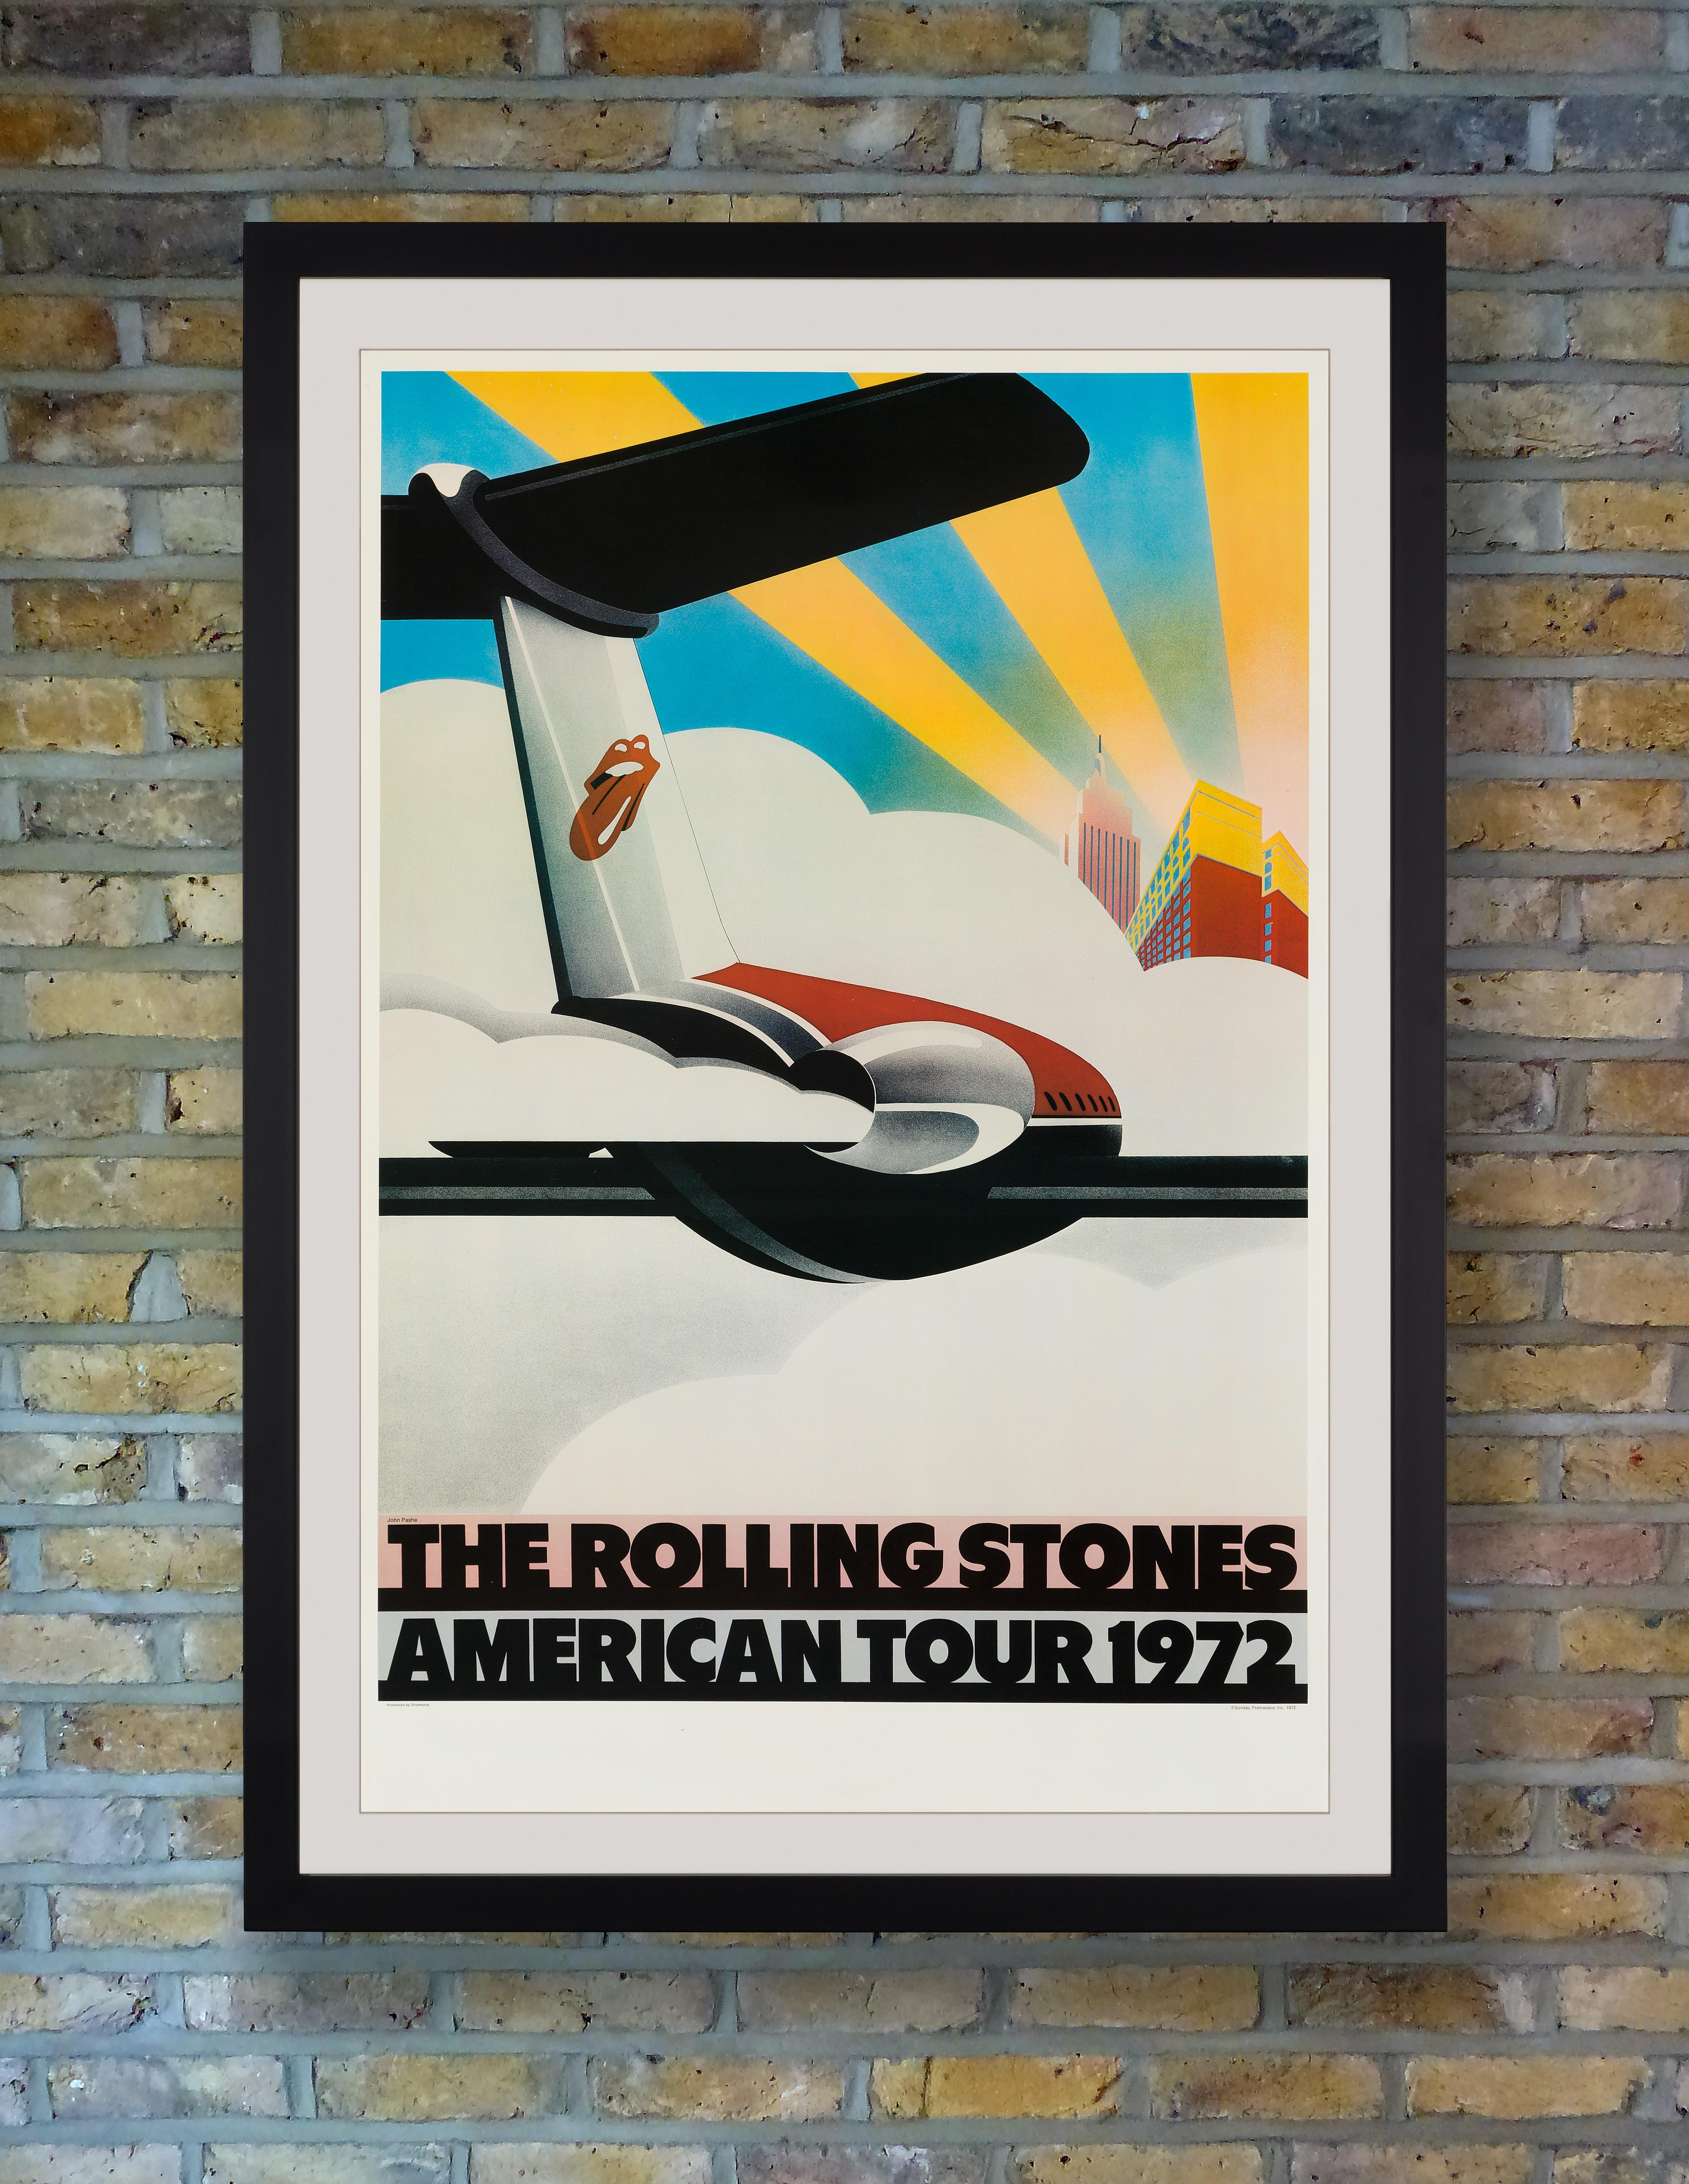 Having designed the rolling stones 1970 European Tour poster while a student at the Royal College of Art, and subsequently created the band's famous tongue and lips logo the following year, John Pasche was asked by Mick Jagger to design a poster for